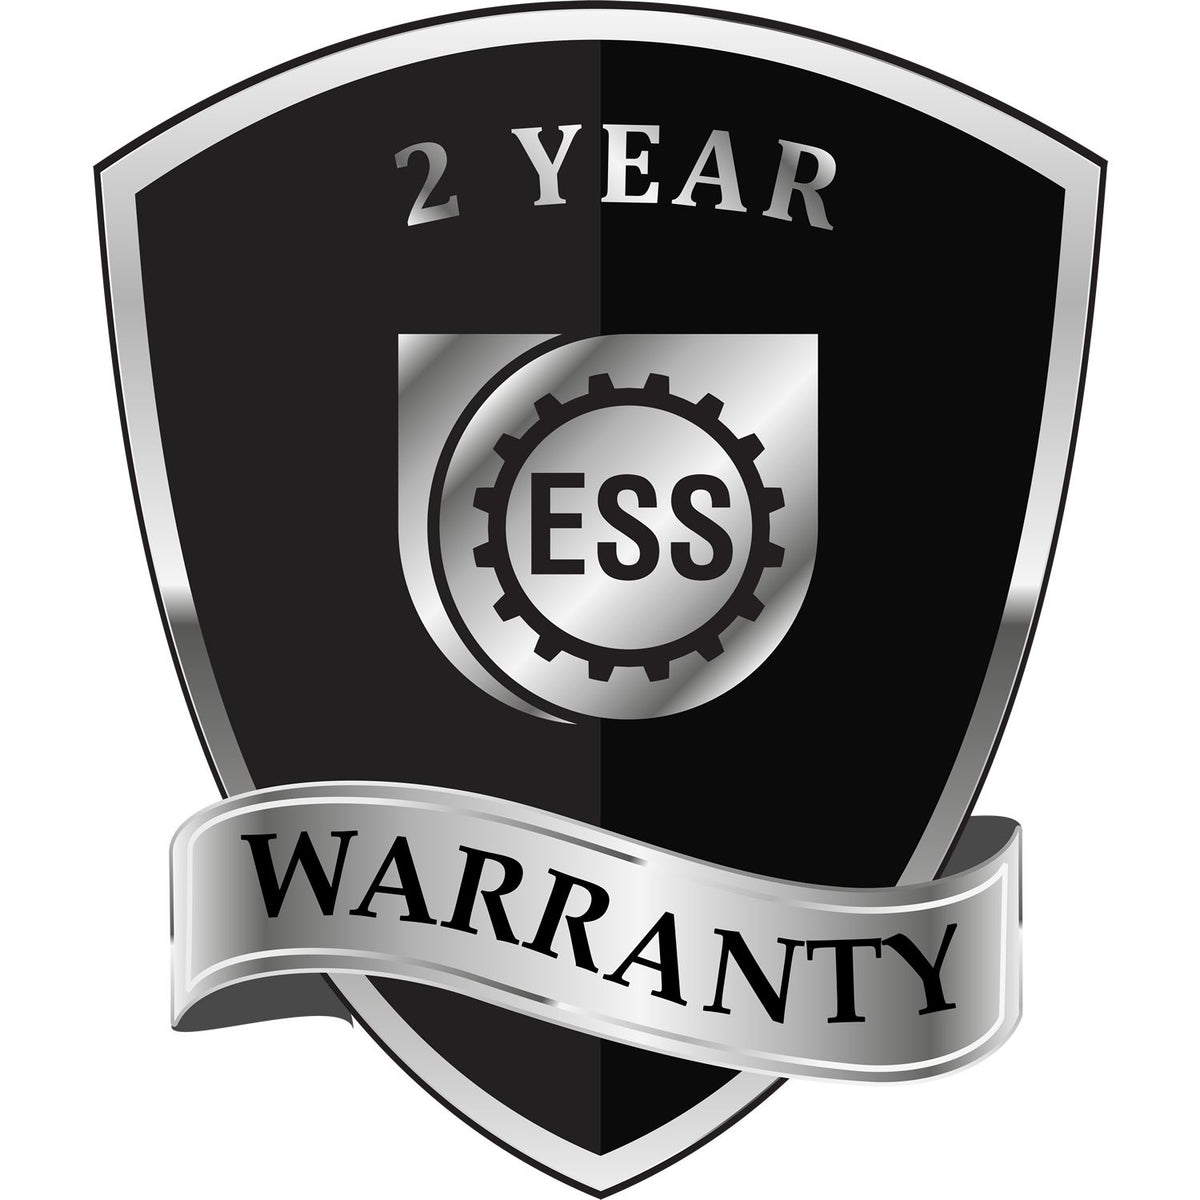 A badge or emblem showing a warranty icon for the Soft Nebraska Professional Engineer Seal